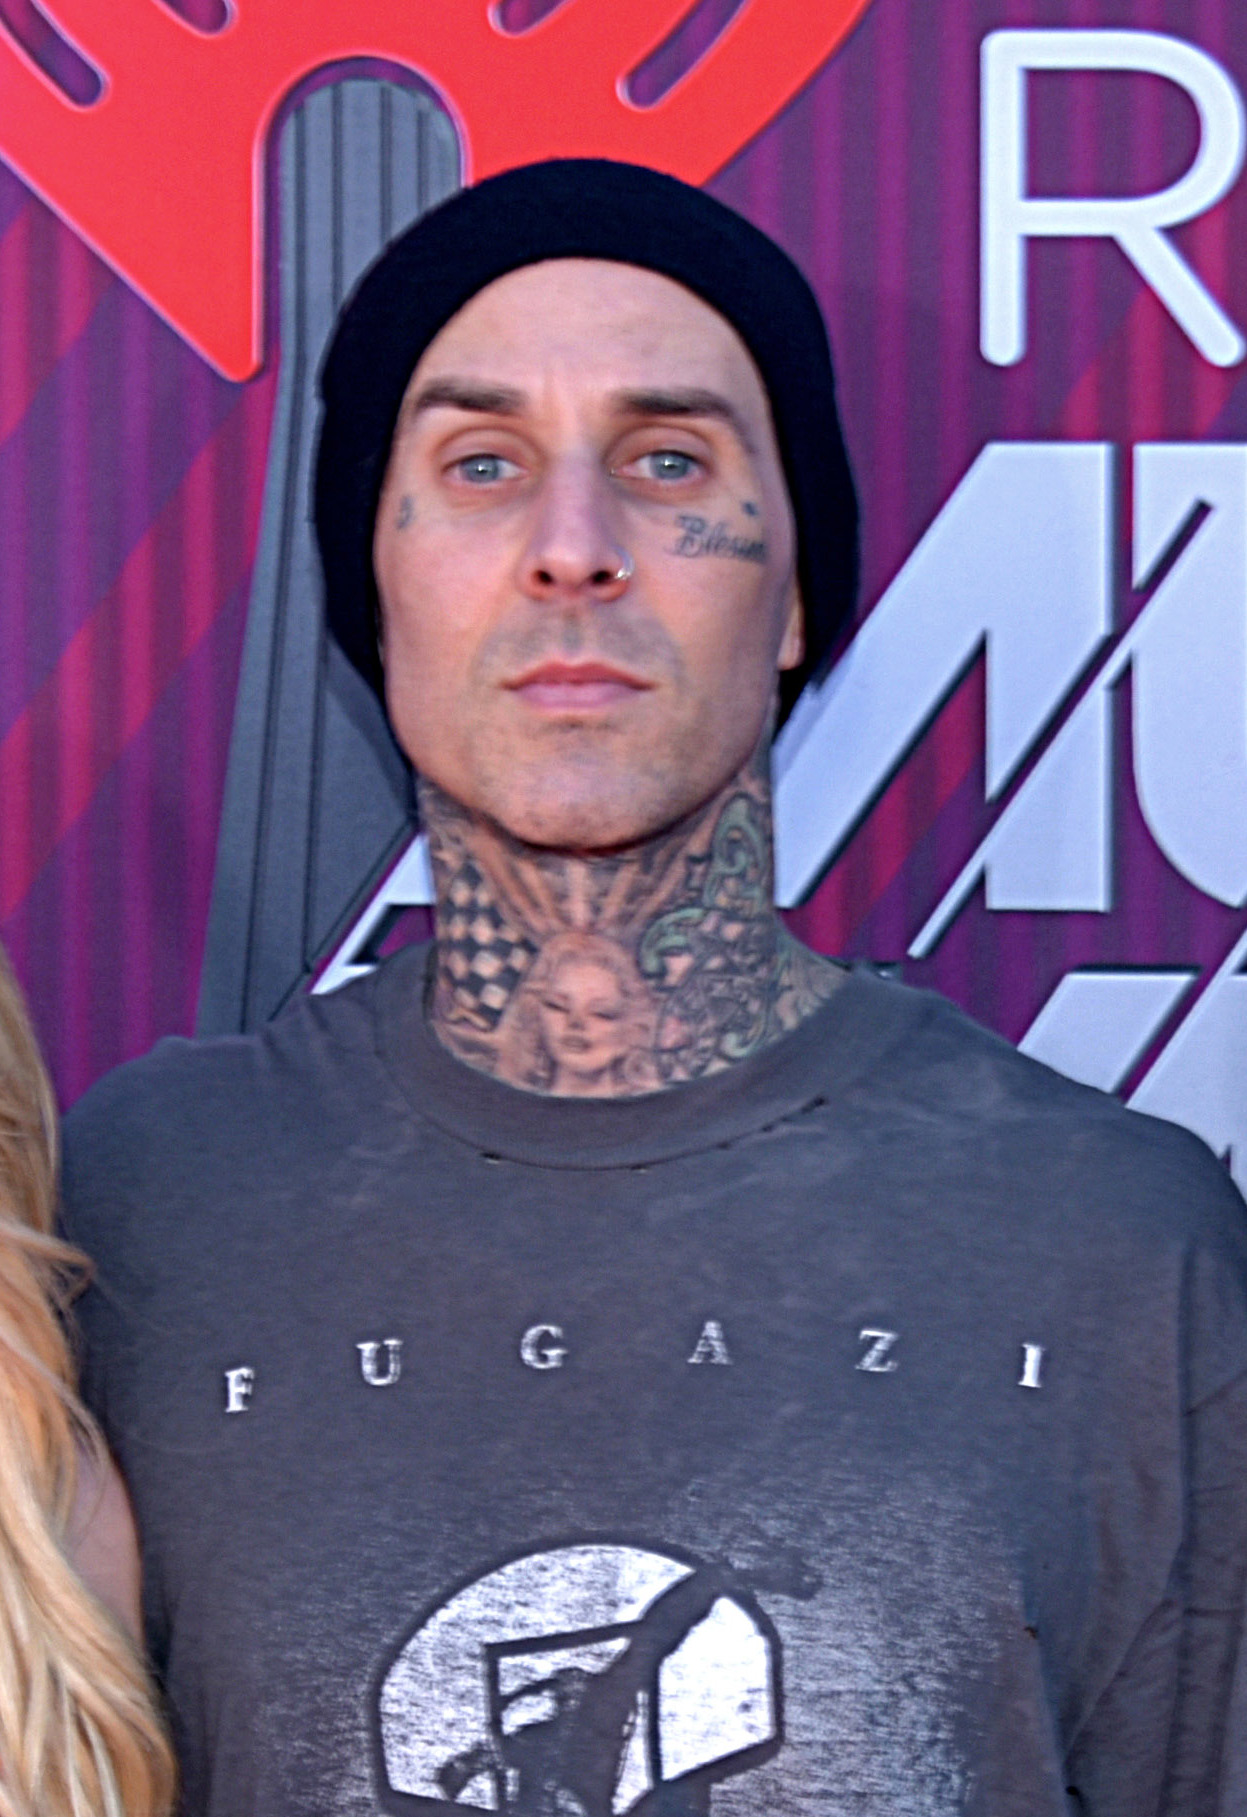 How Old is Travis Barker?